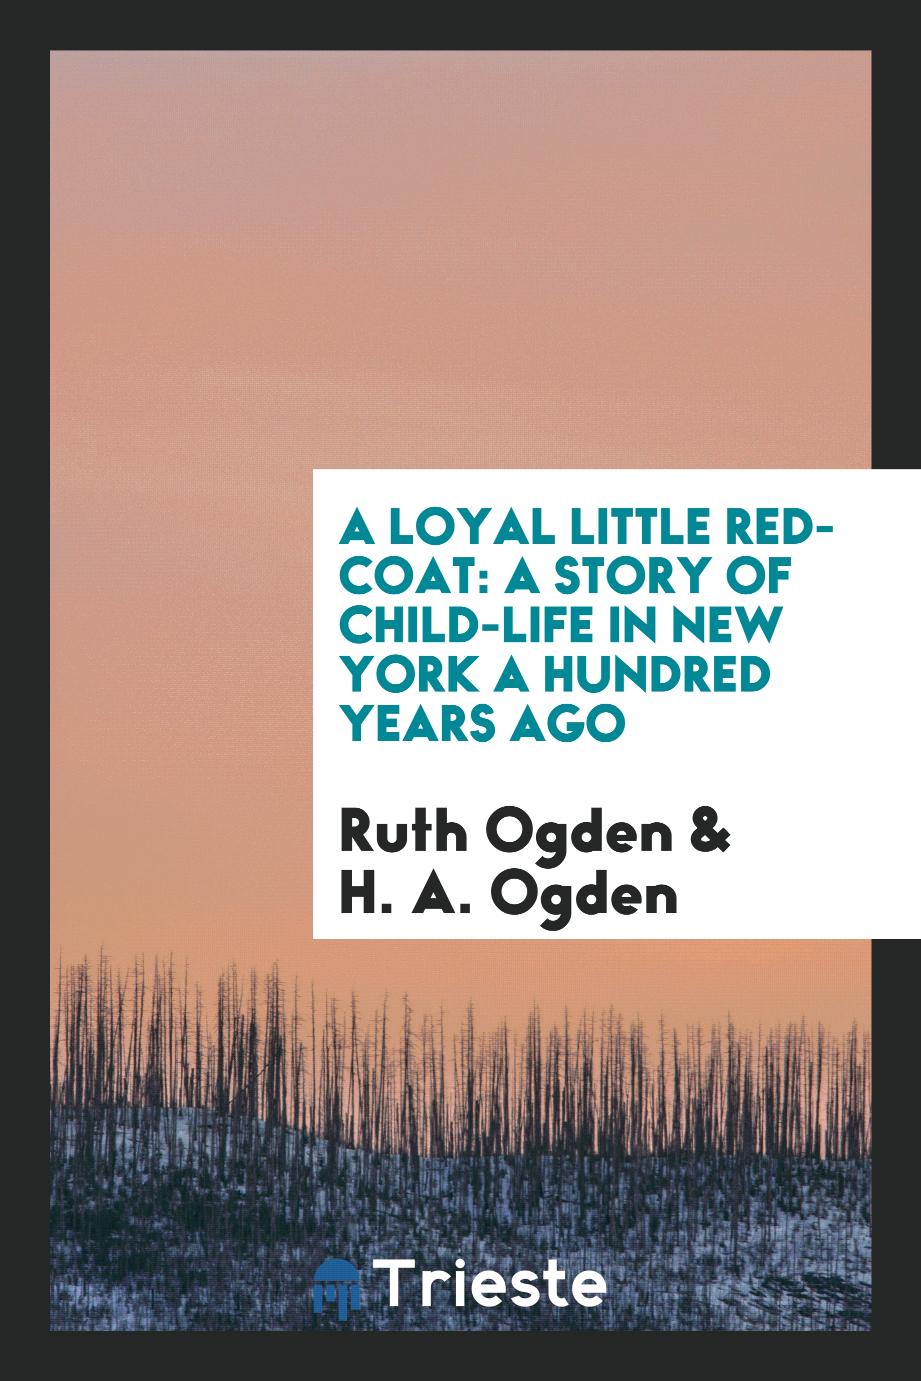 A loyal little red-coat: a story of child-life in New York a hundred years ago